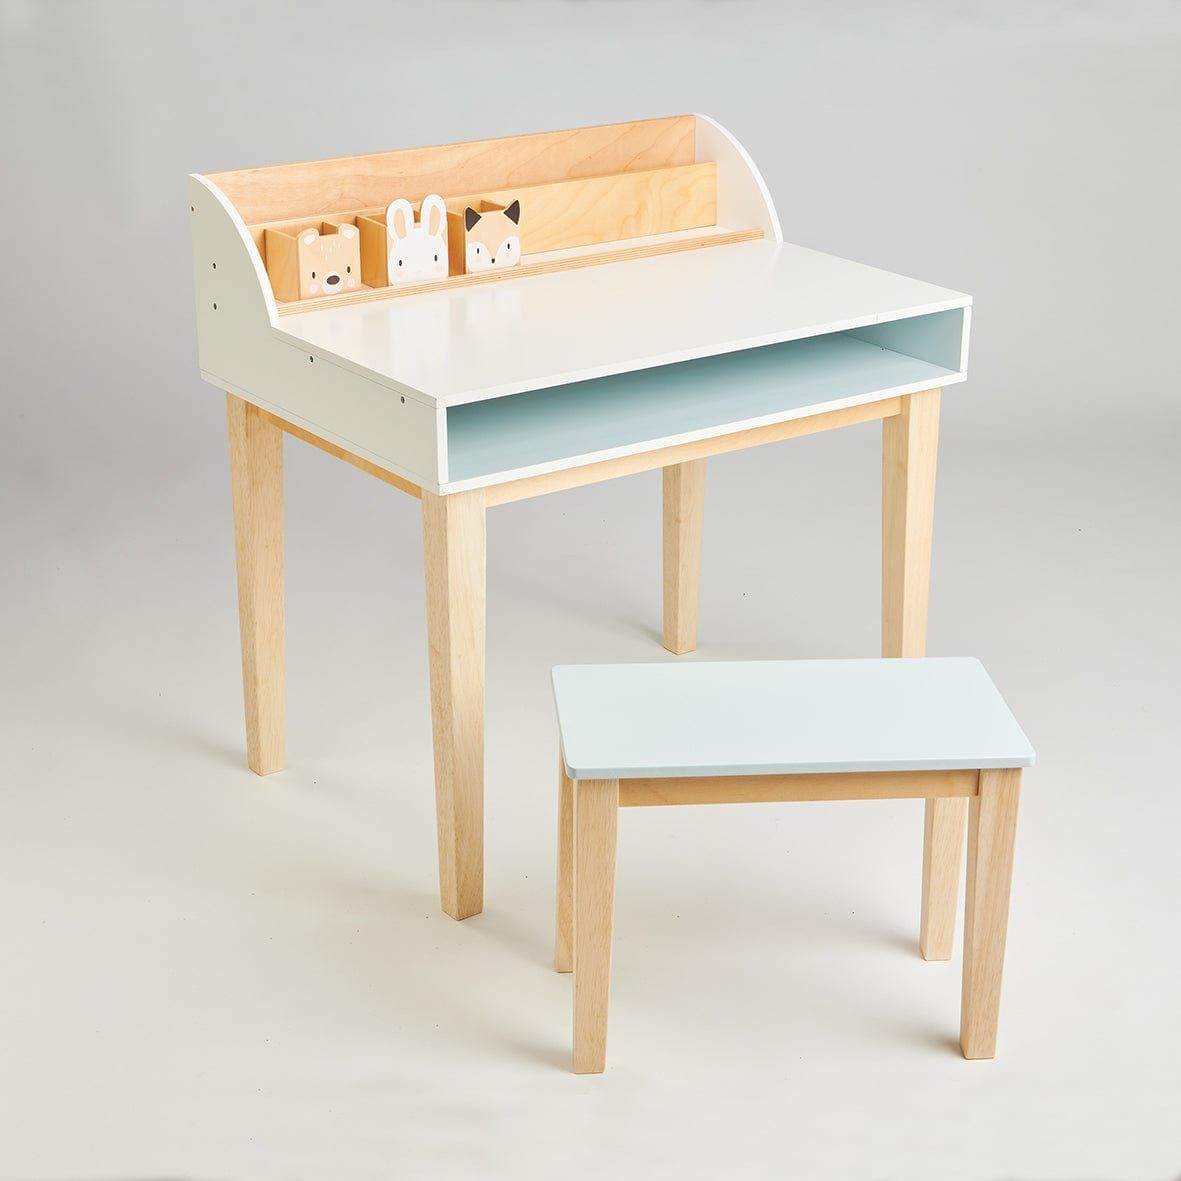 Tender Leaf Wooden Desk and Chair - The Online Toy Shop1